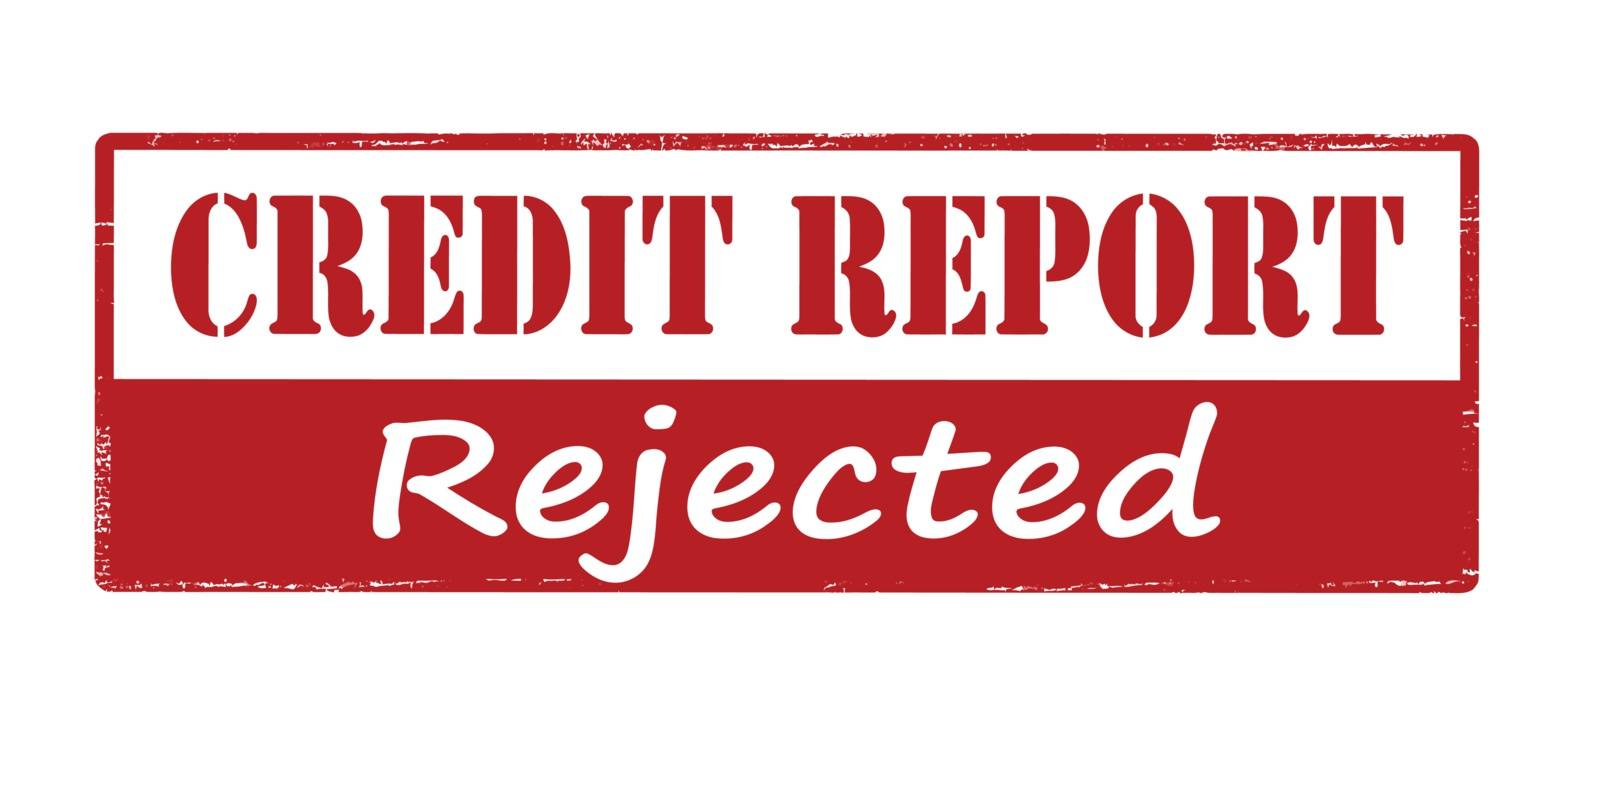 Credit report rejected by carmenbobo